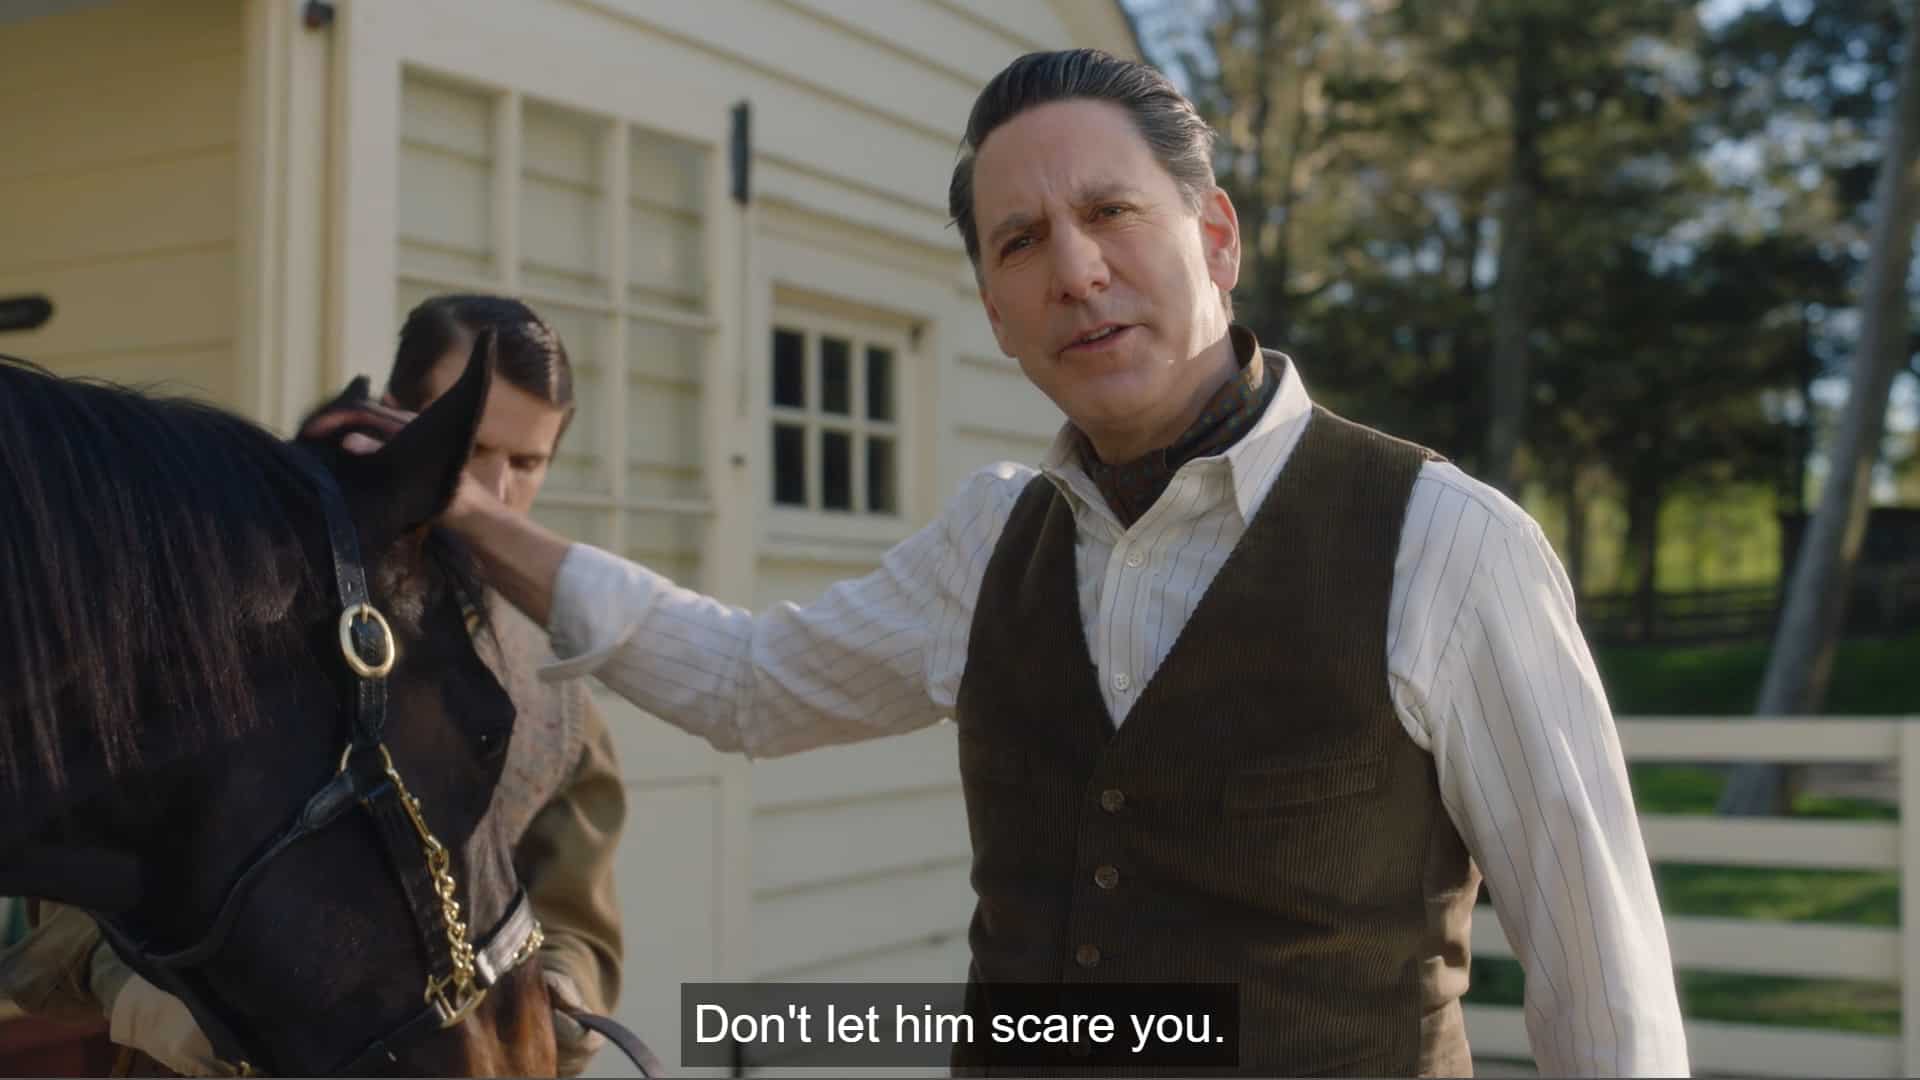 Solomon (Scott Cohen) telling Rose she has no reason to be scared of his horse, before learning her background